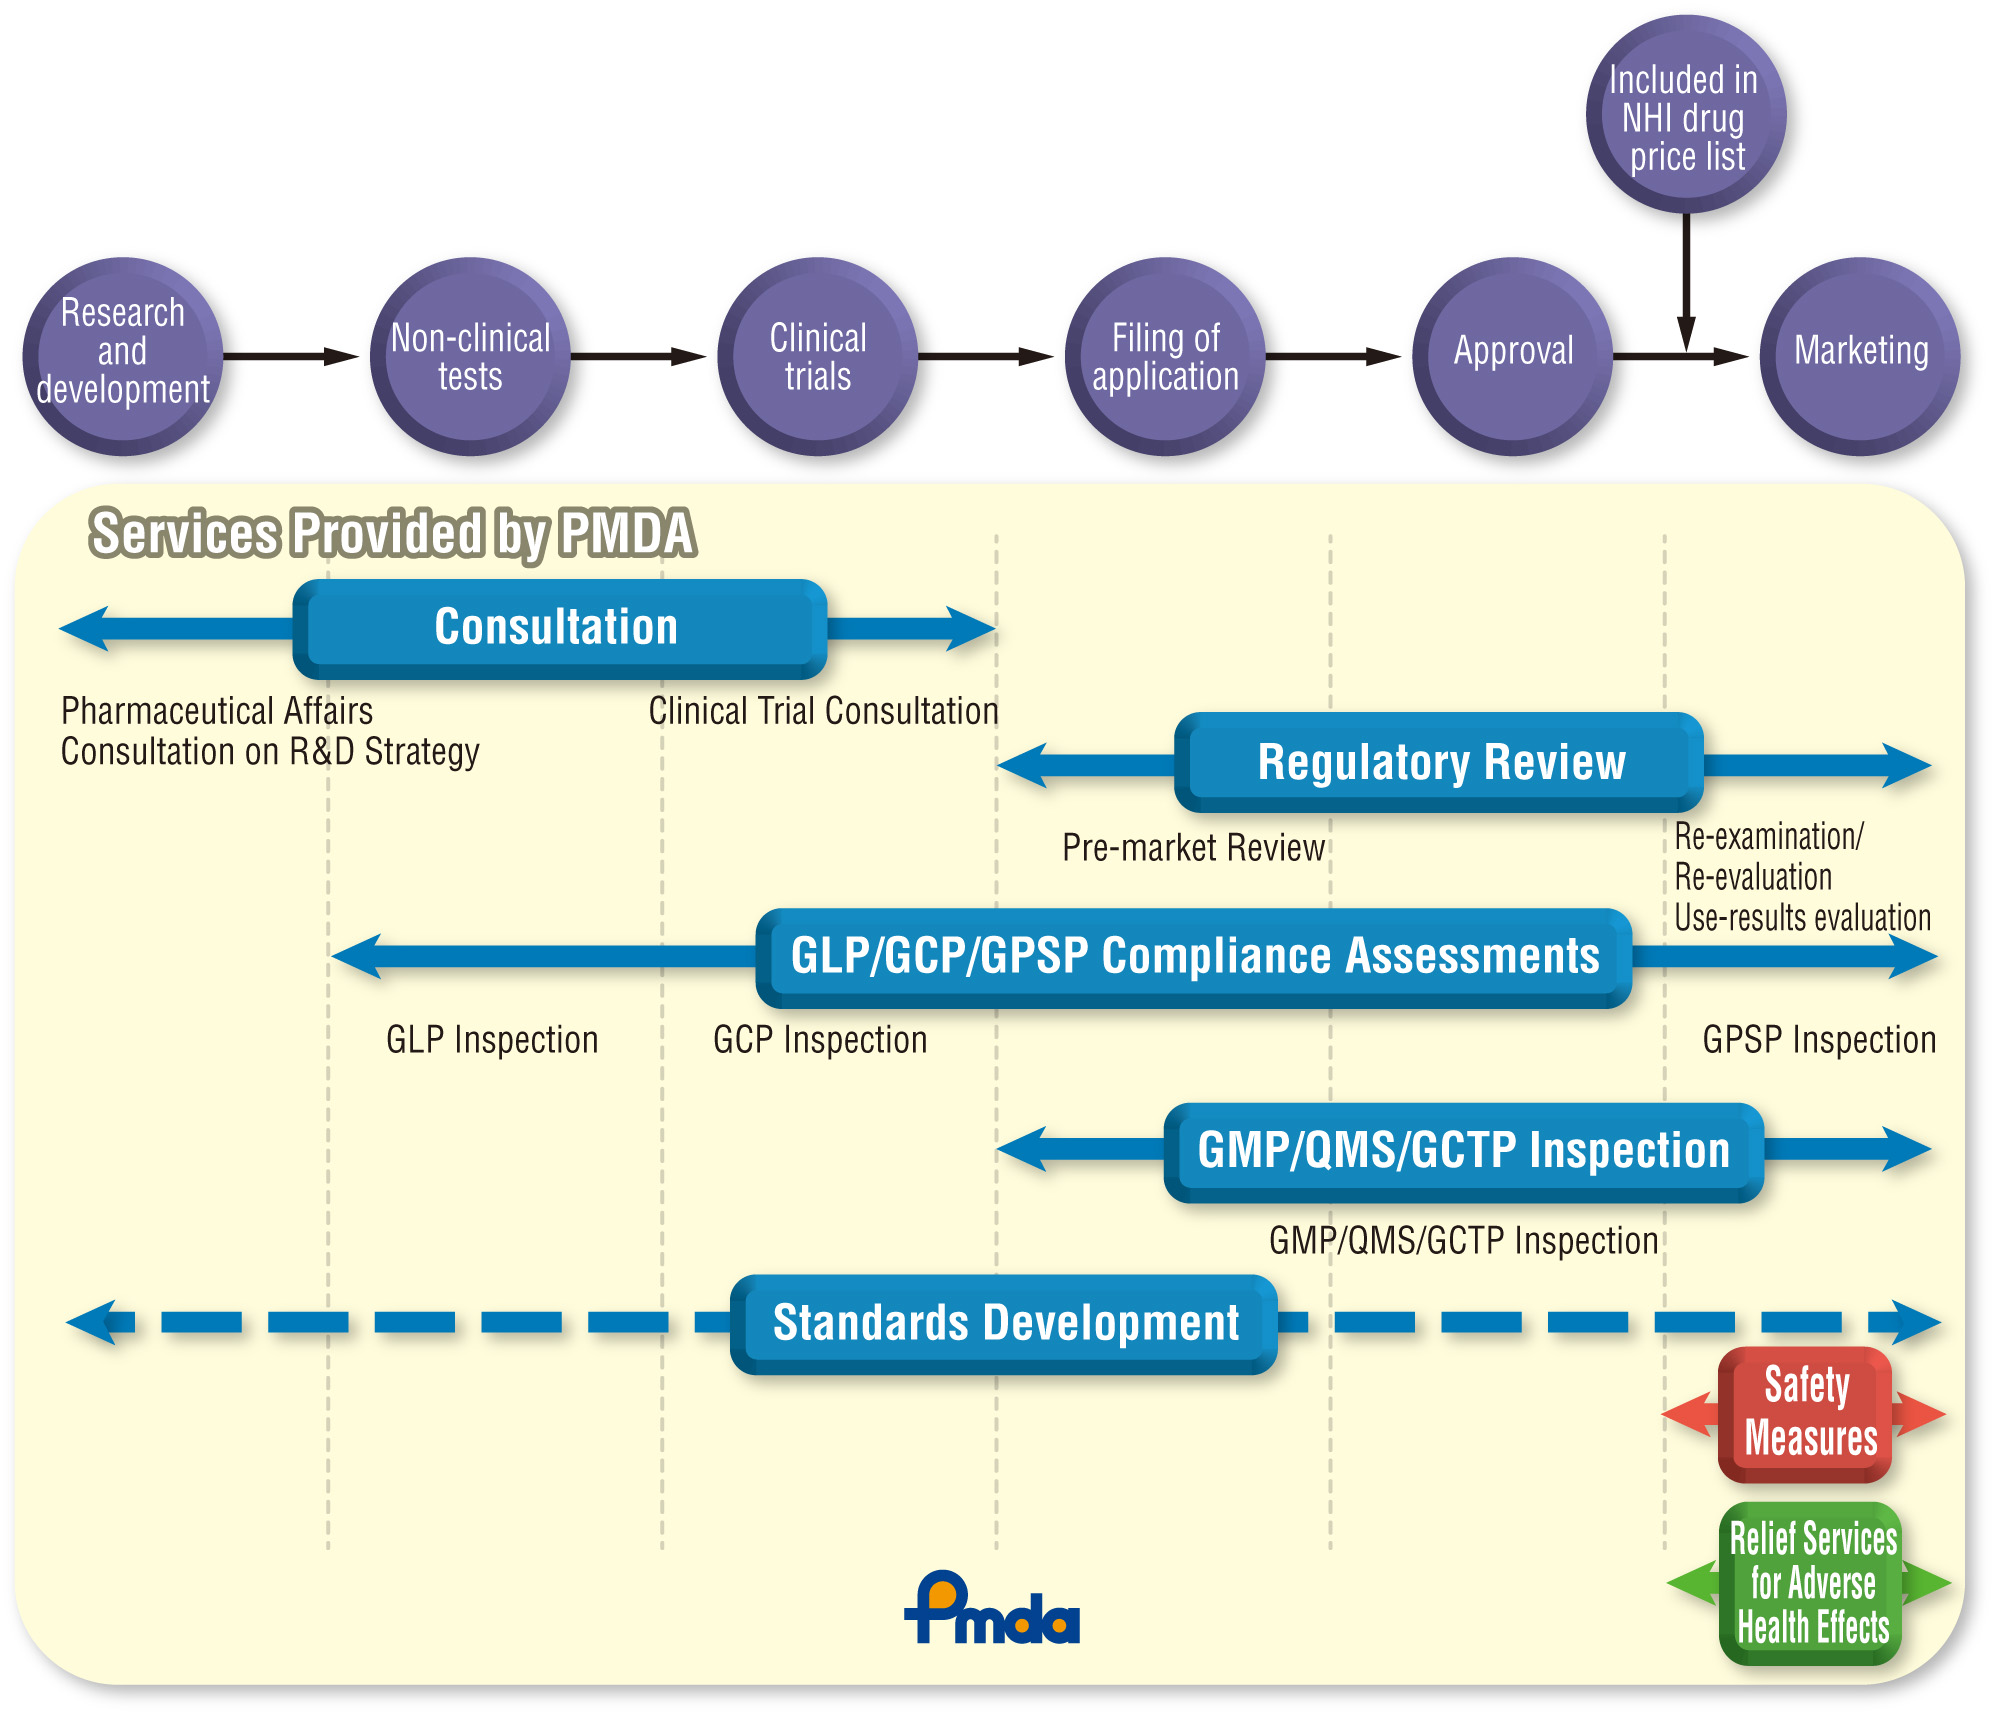 Life Cycle of Drug or Medical Device: From Development to Marketing